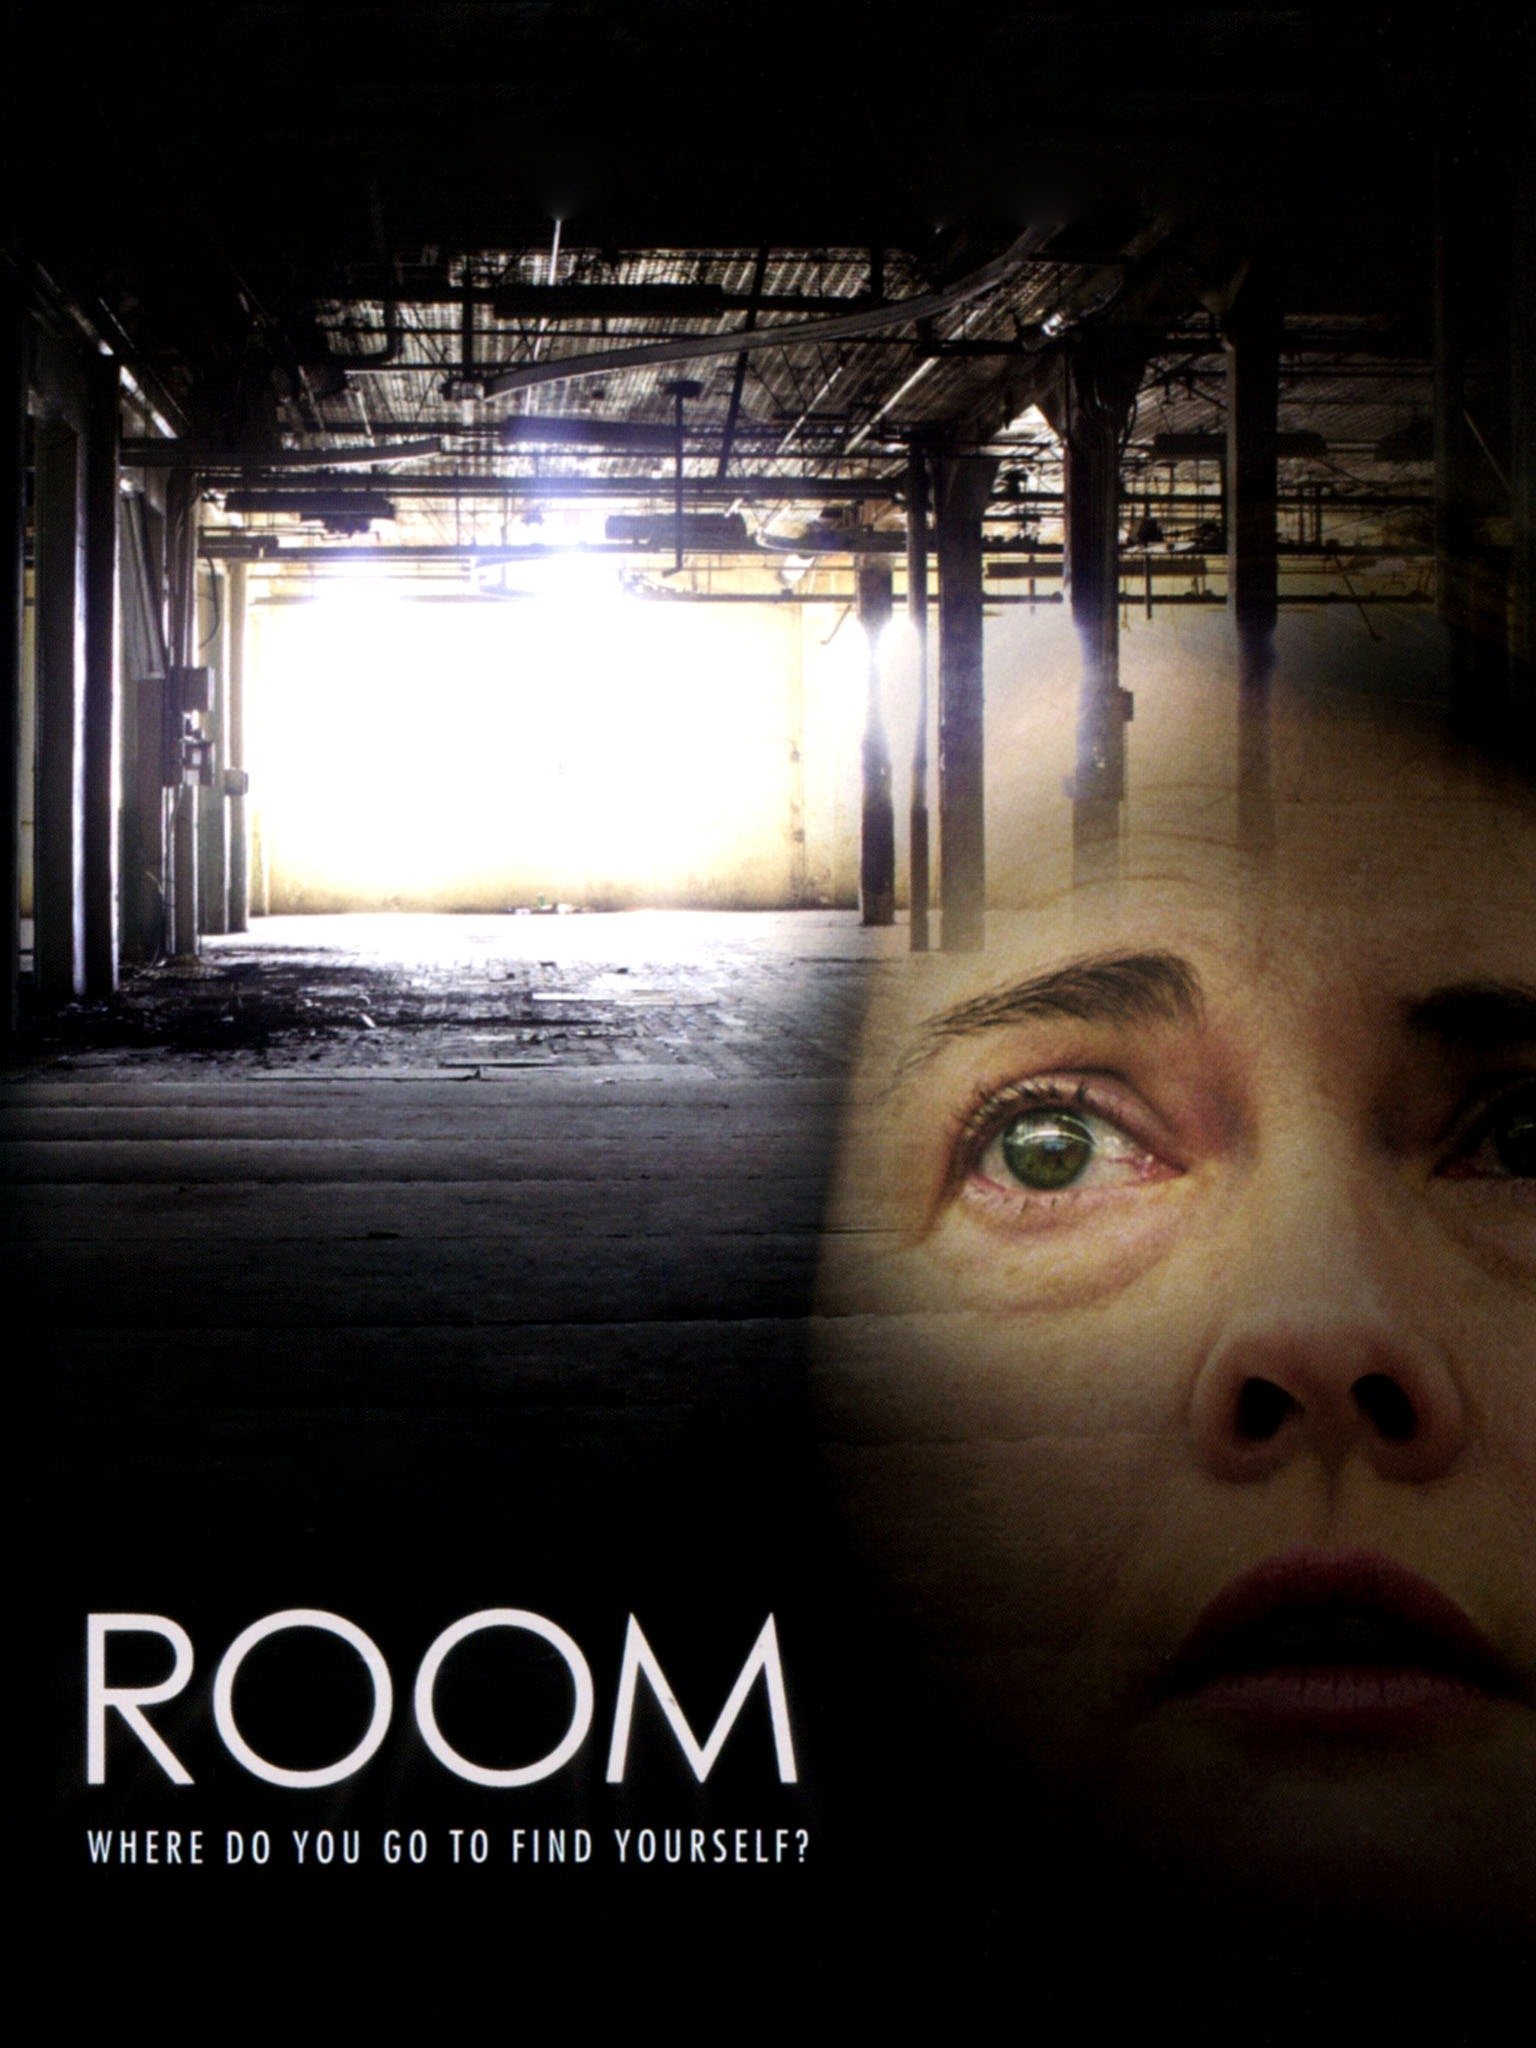 The room poster. Room 2005.